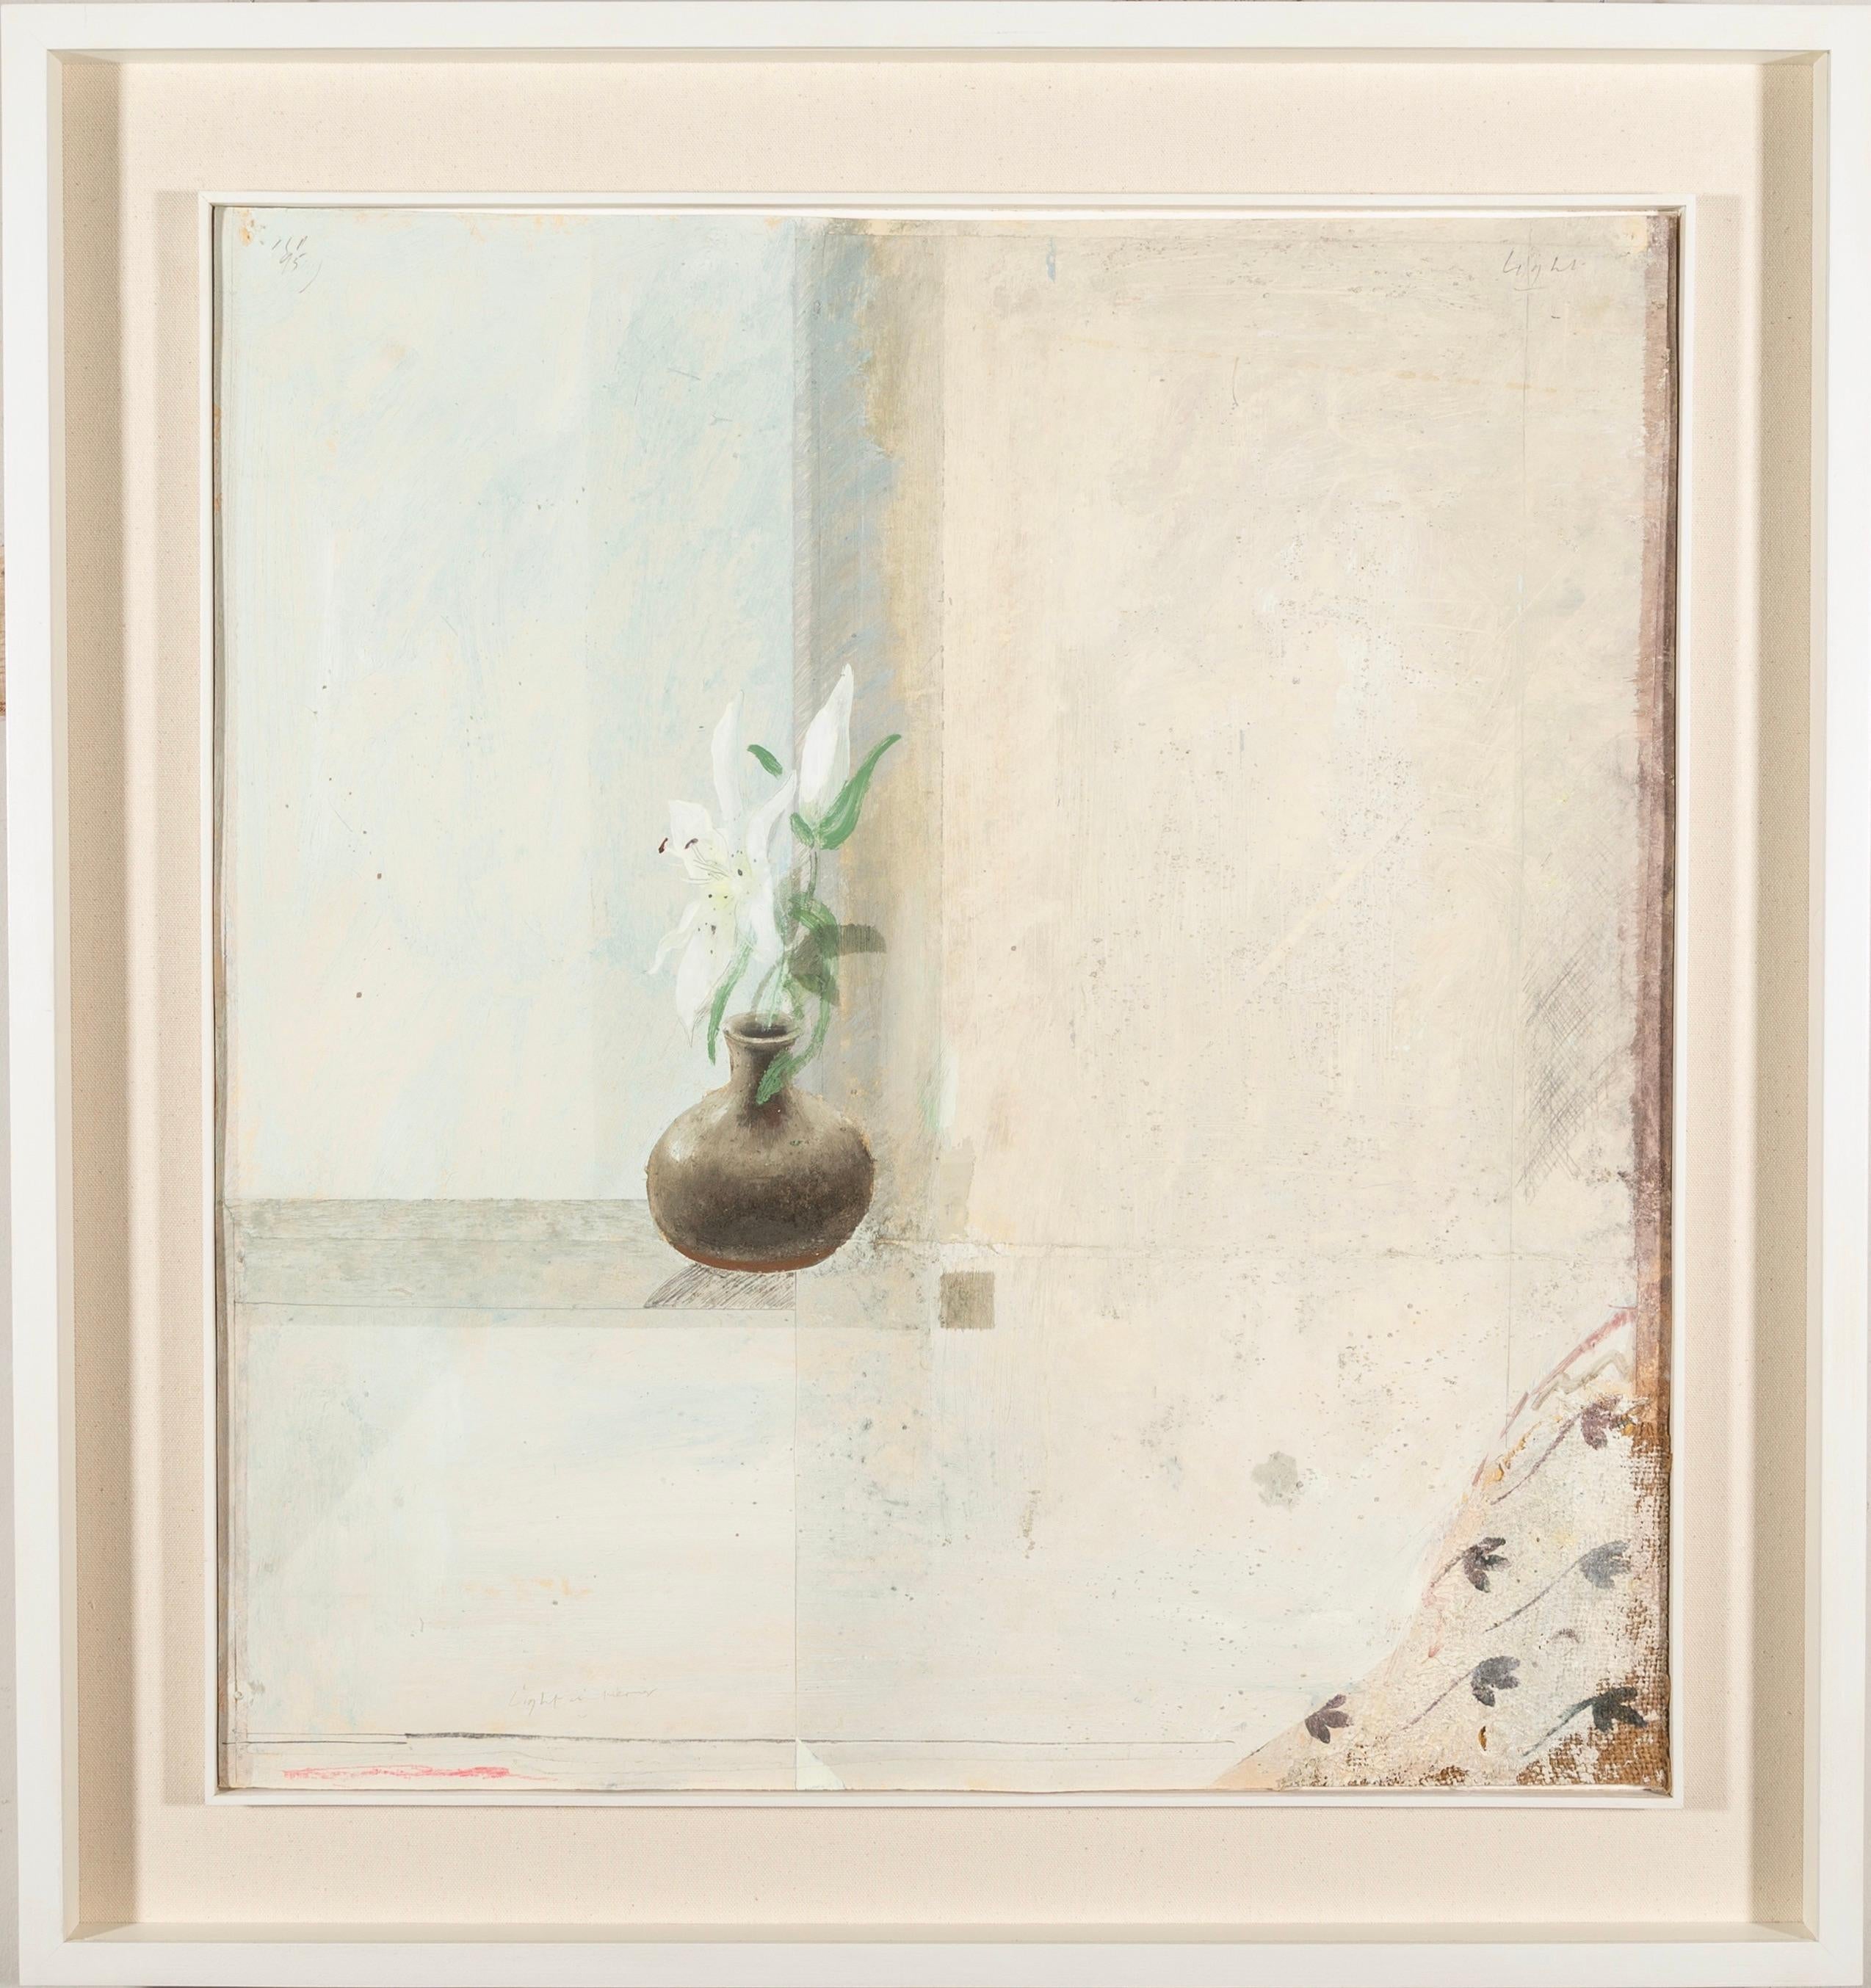 Light, Light Interior - still life painting with flowers, neutral tones, white - Mixed Media Art by Keith Purser